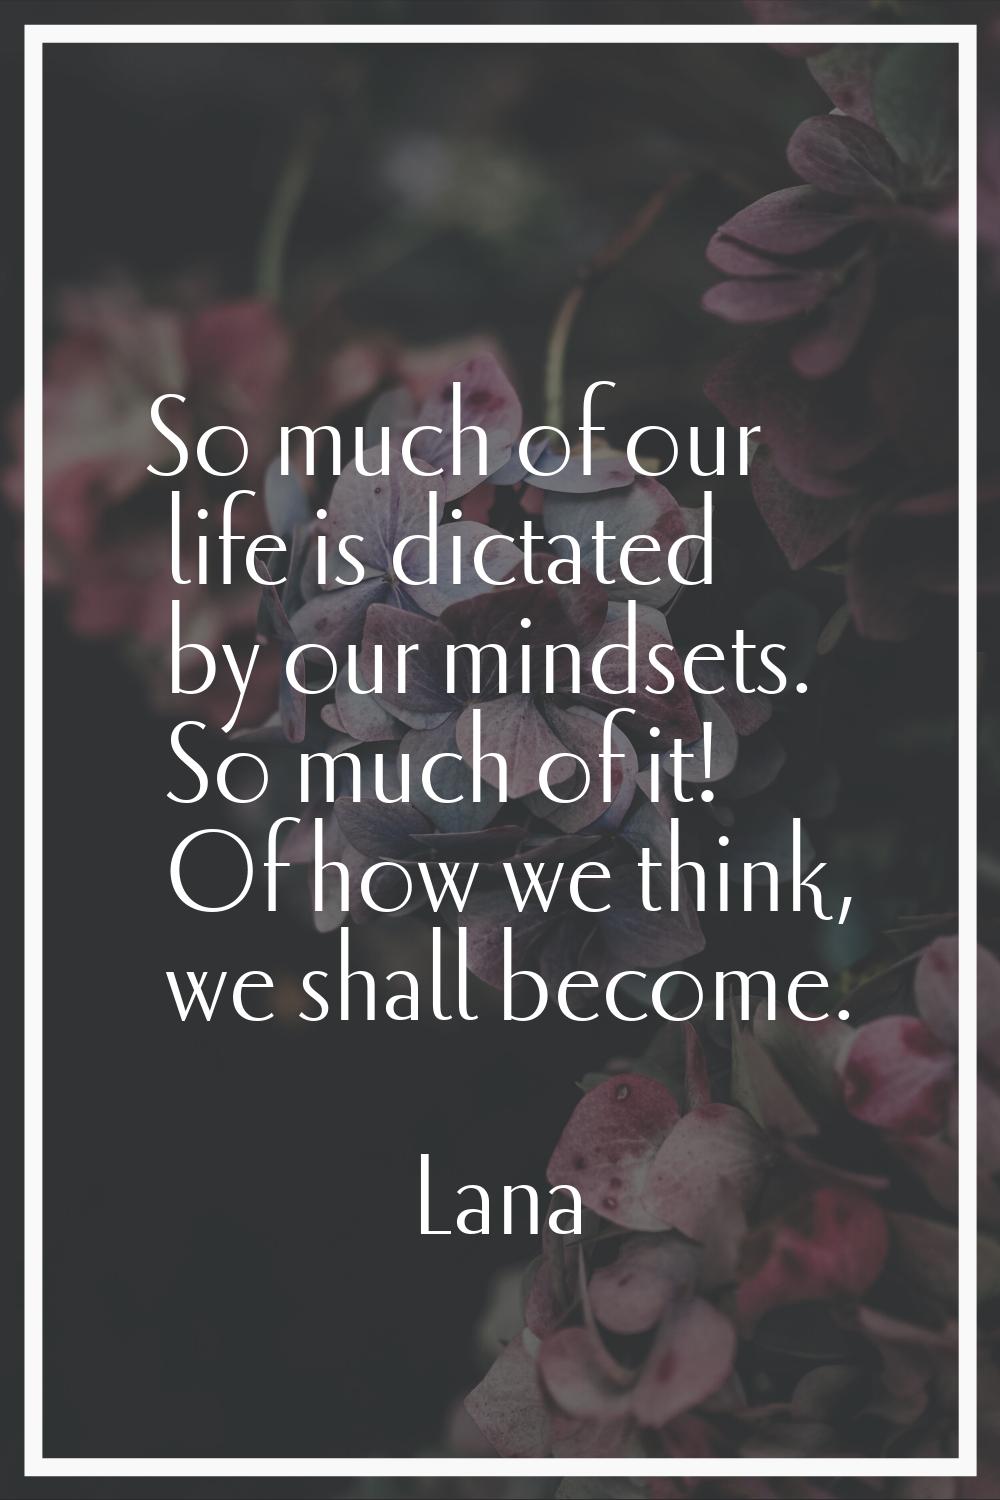 So much of our life is dictated by our mindsets. So much of it! Of how we think, we shall become.